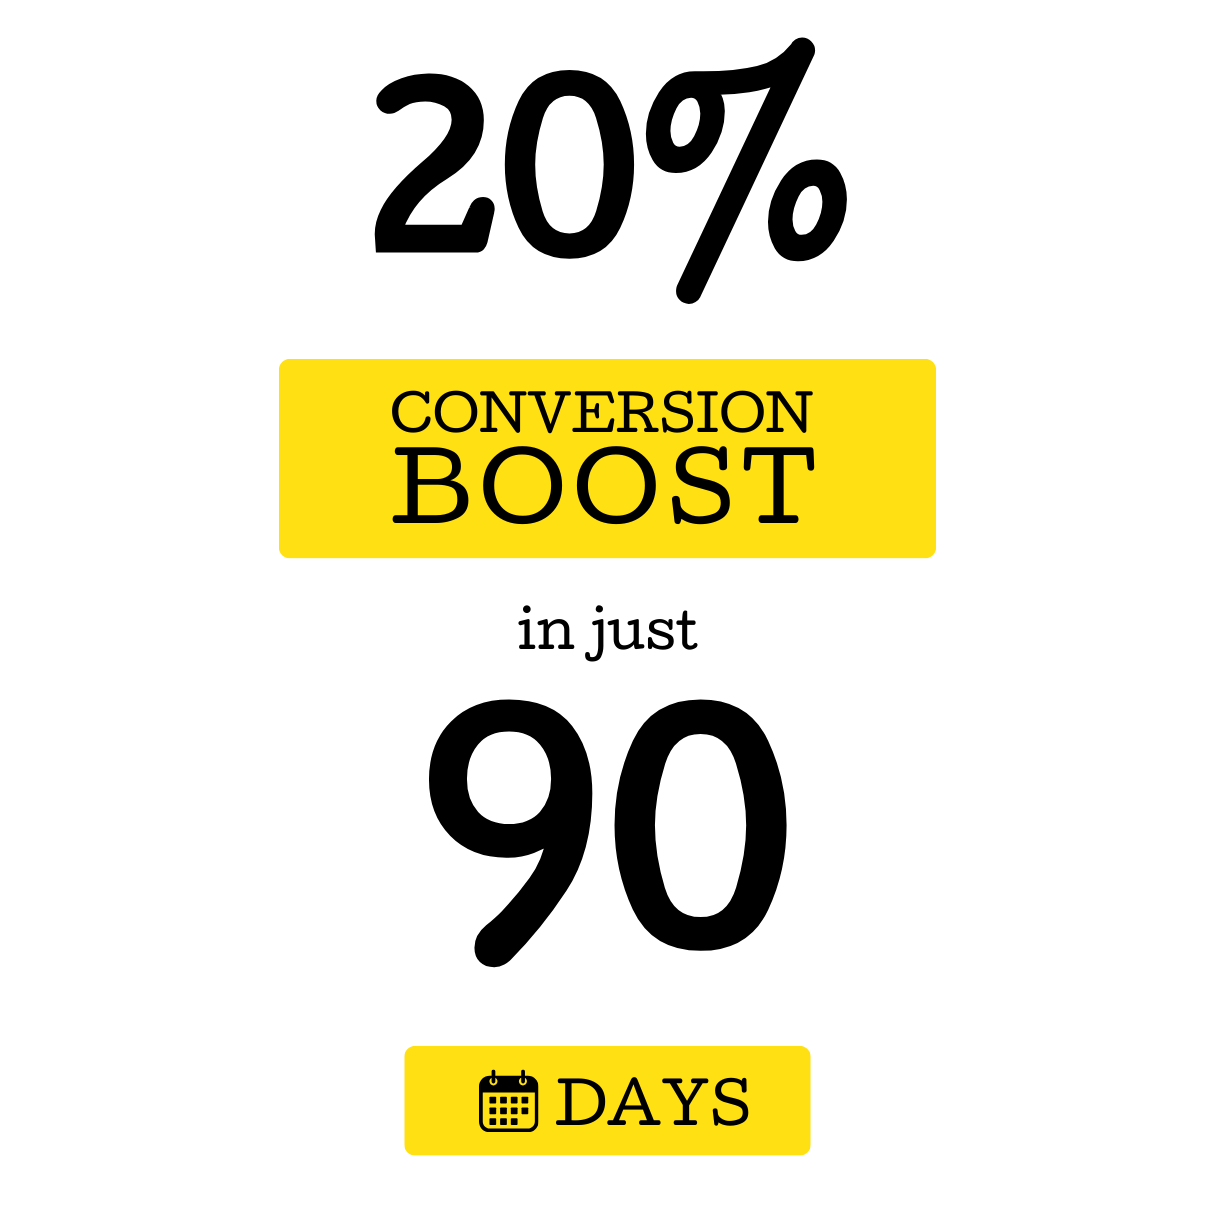 write copy that boosts conversions
20 percent boost in 90 days